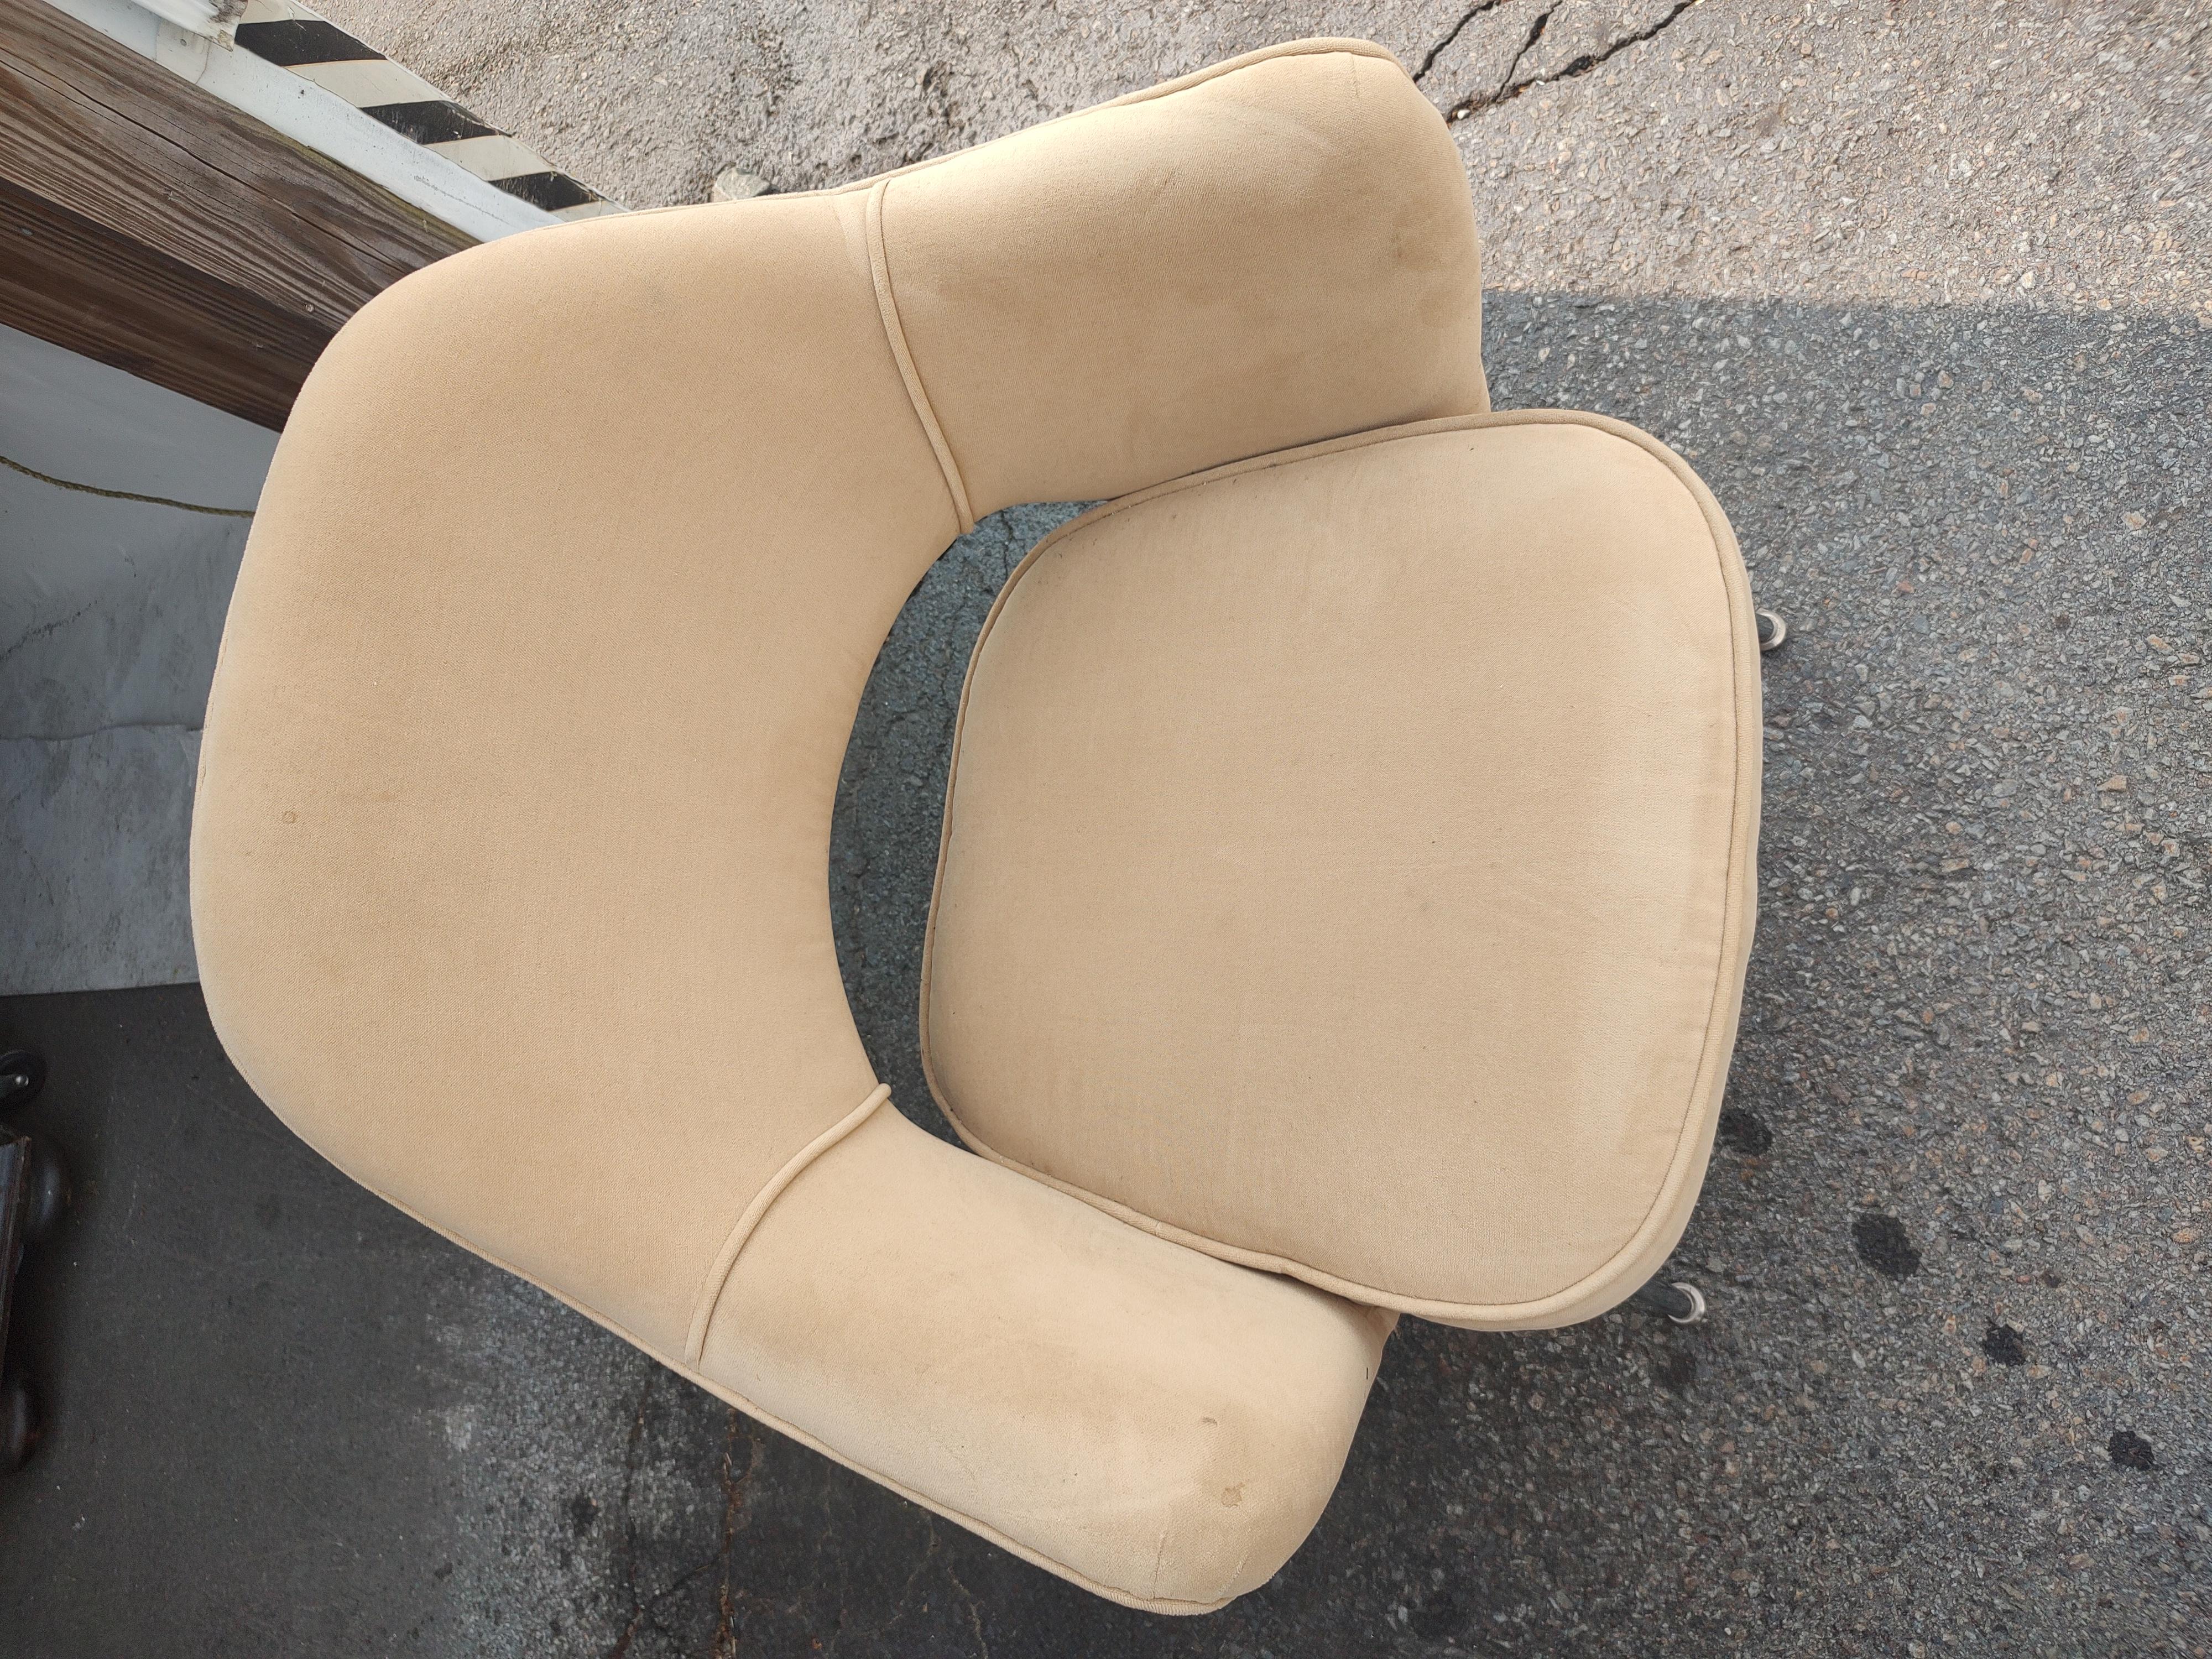 Pair of Mid-Century Modern Executive Armchairs by Eero Saarinen for Knoll, C1965 For Sale 1